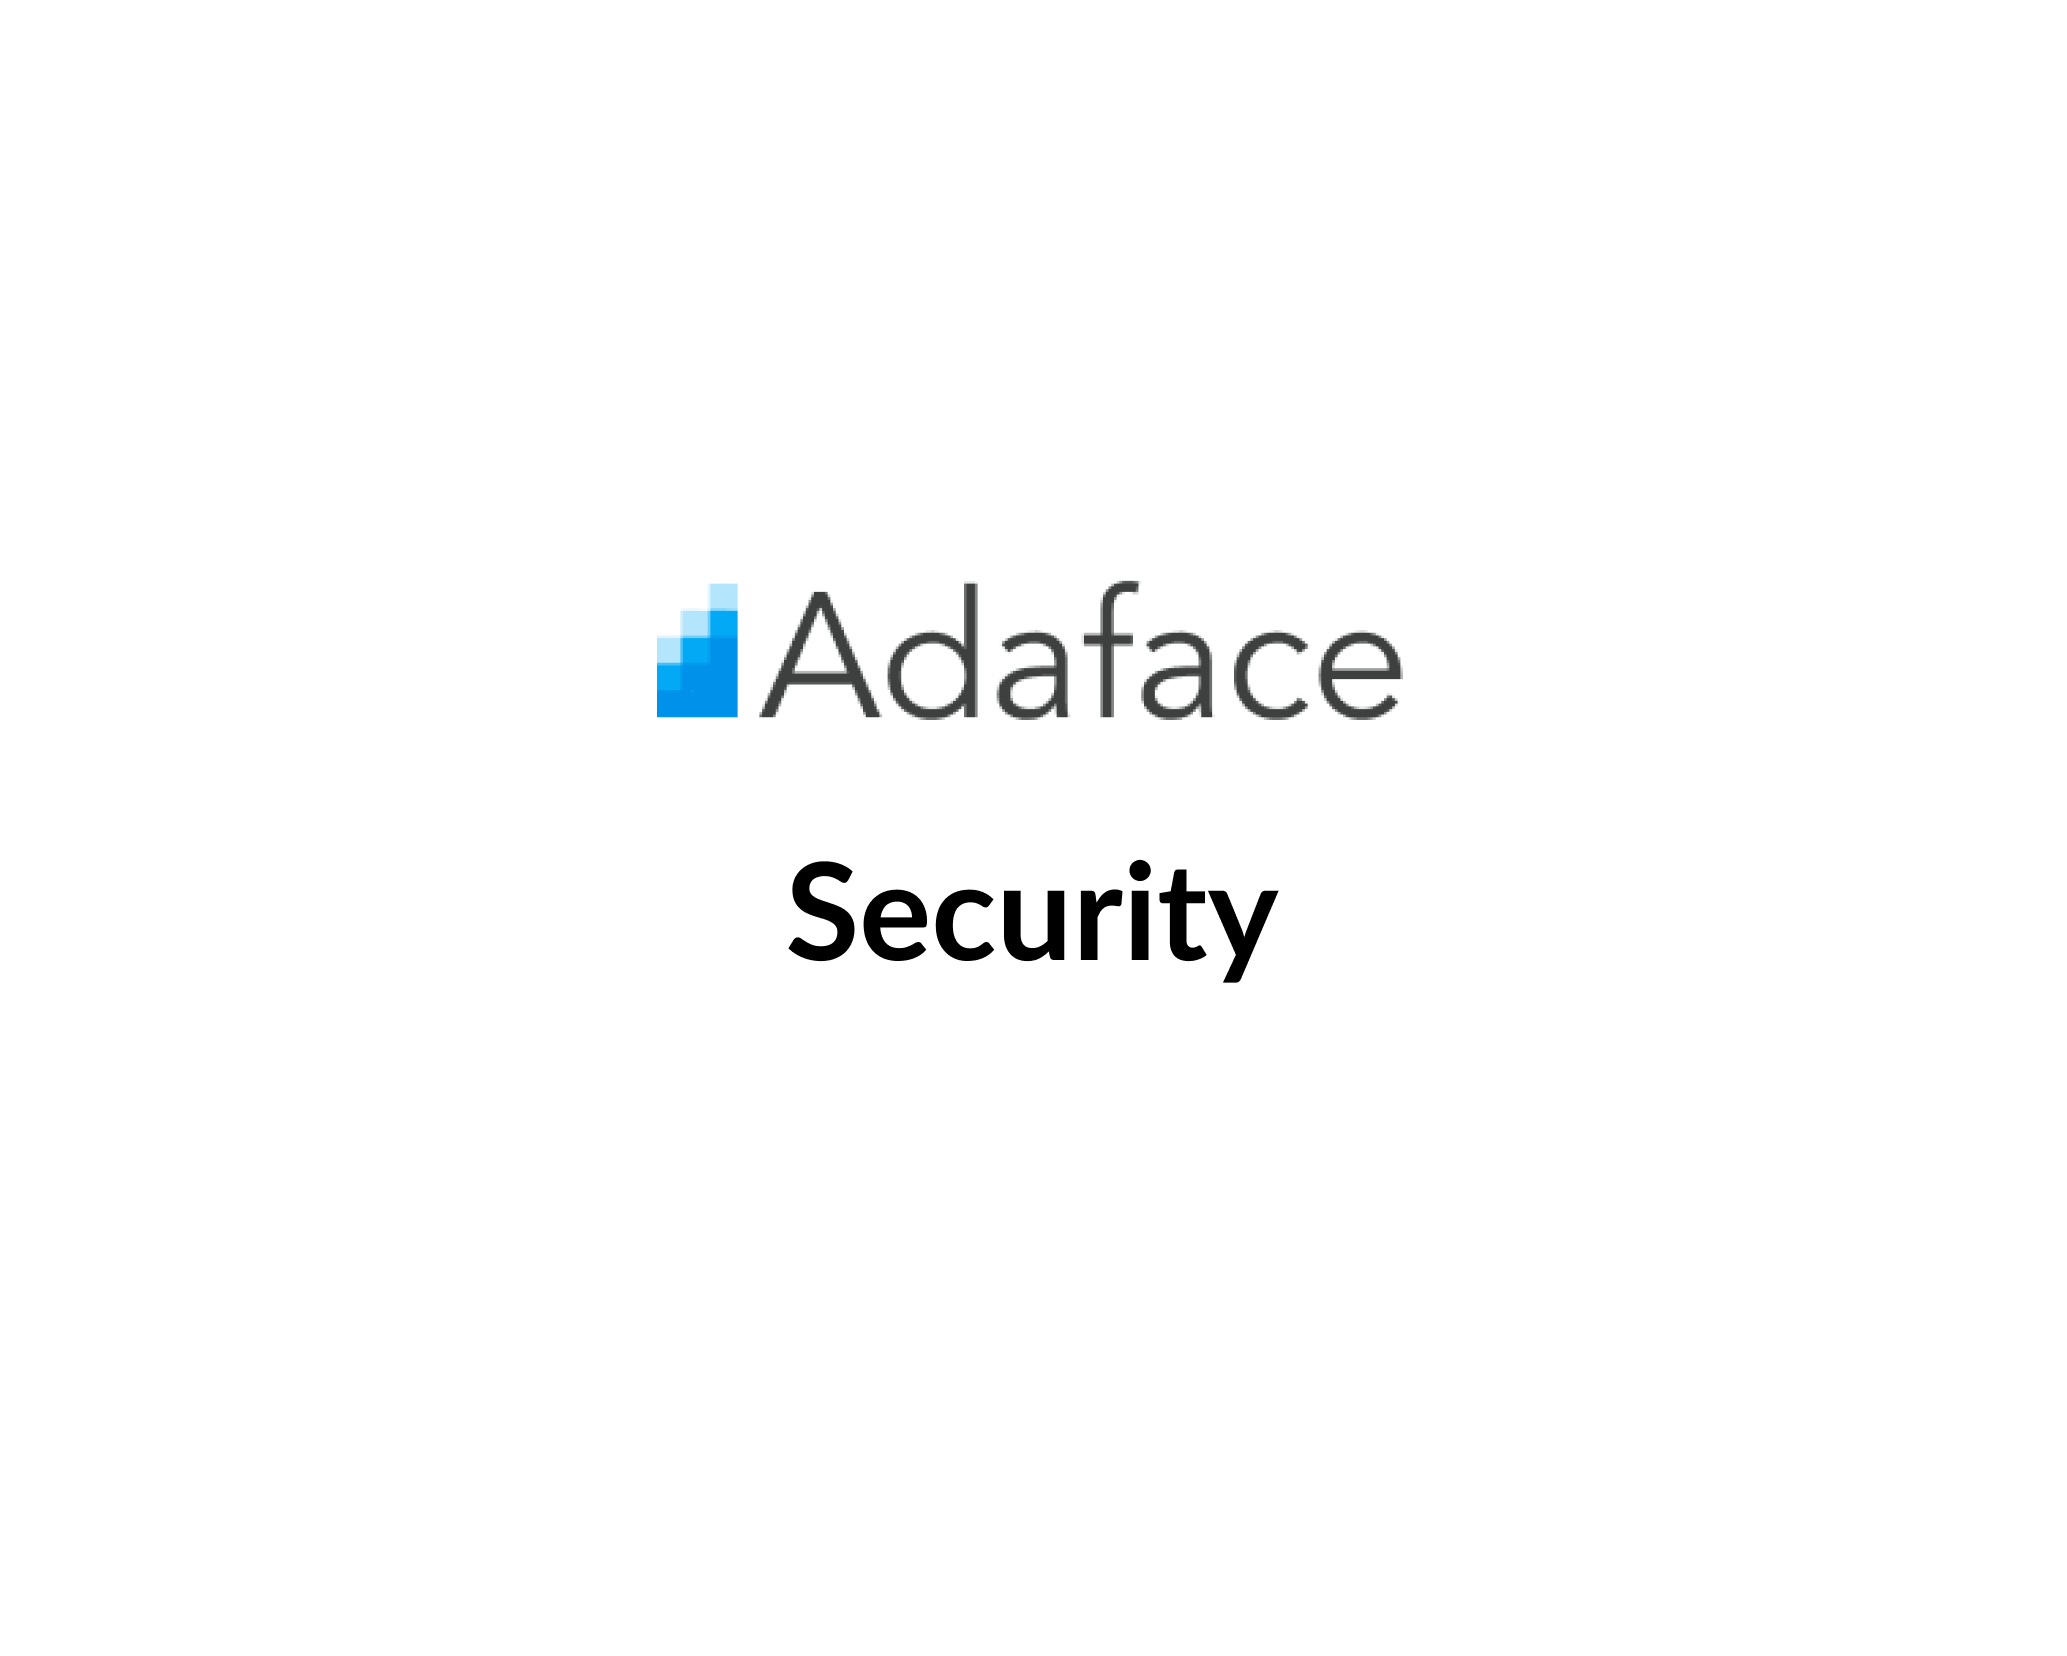 Adaface approach to security image